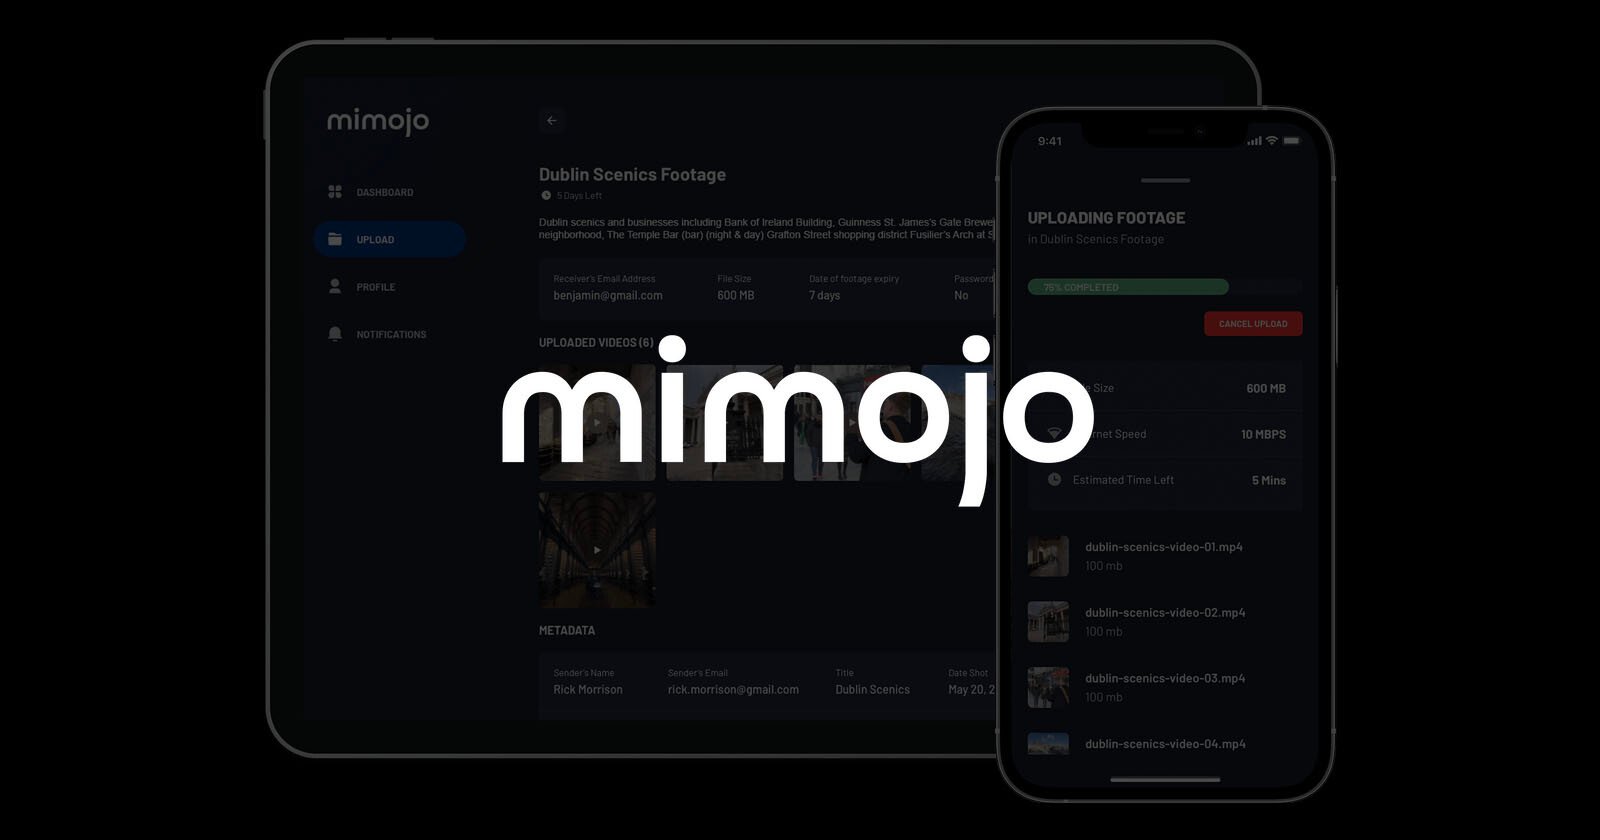 MiMojo is a New Pro-Level App for Sending and Receiving Mobile Video